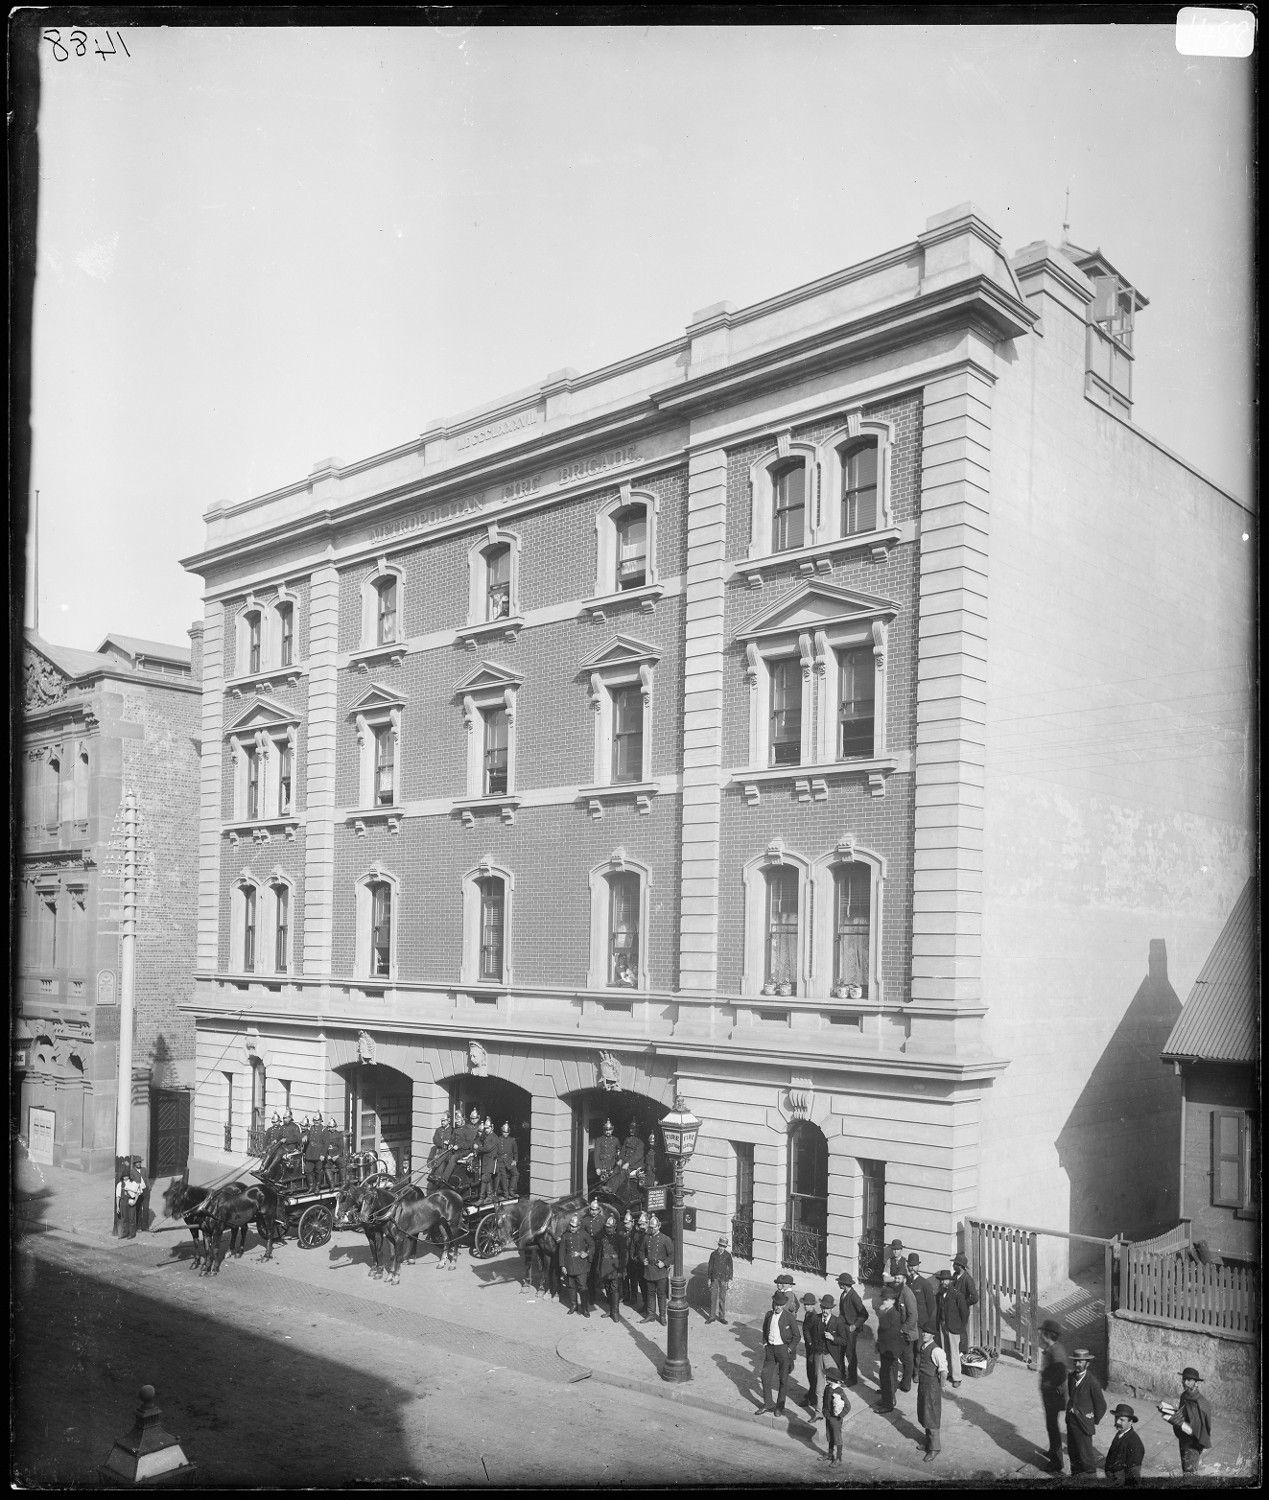 undated photo of the Metropolitan Fire Station No.1 in Castlereagh Street, Sydney